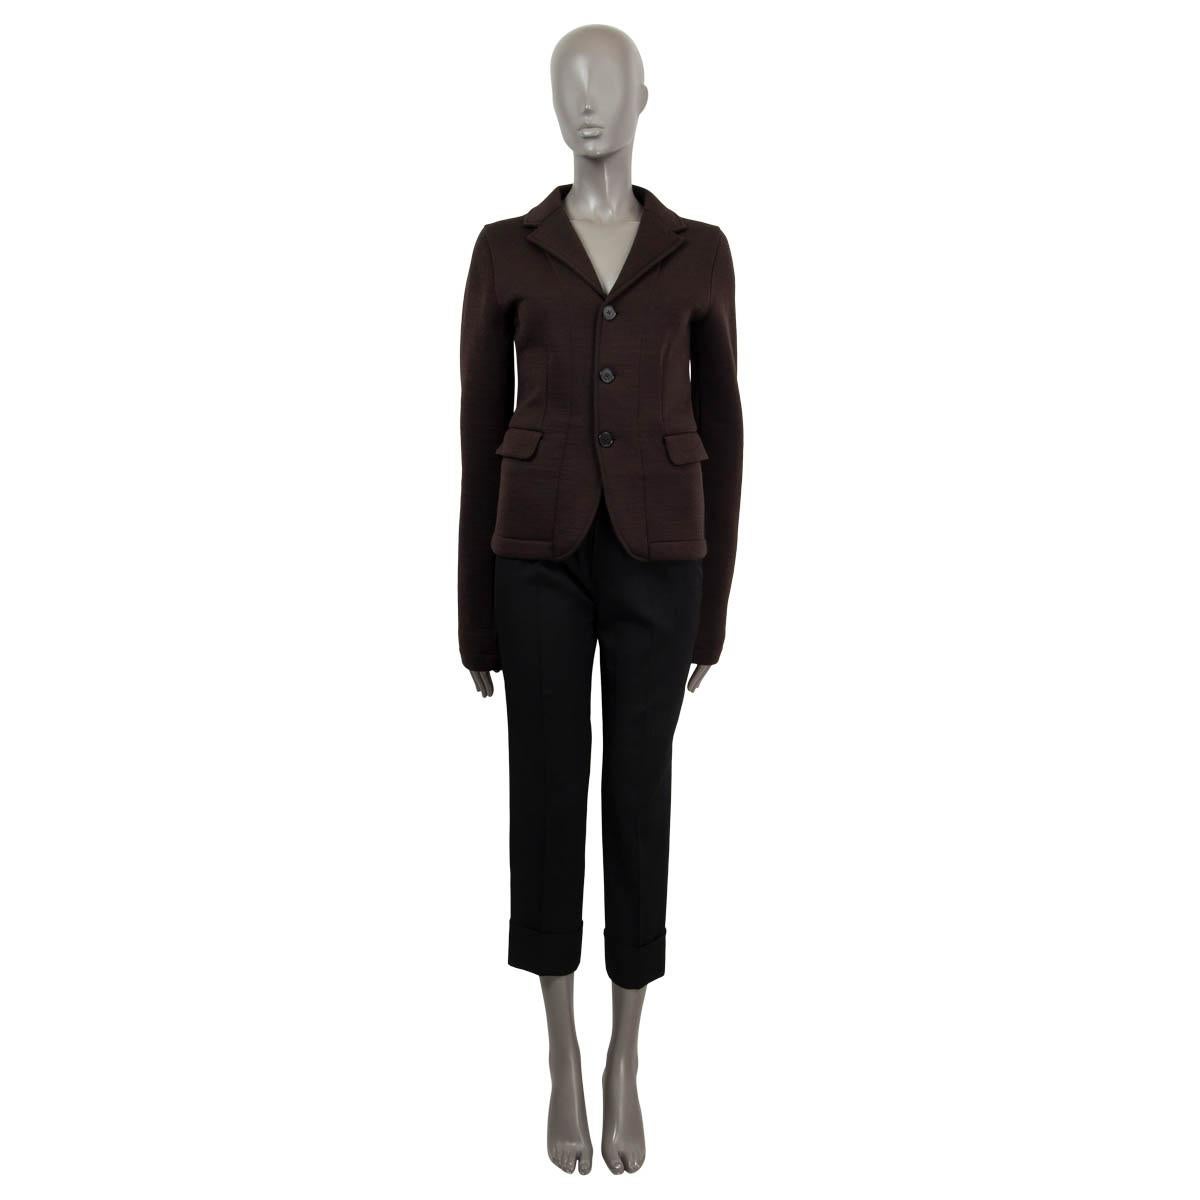 100% authentic Jil Sander blazer in dark brown wool (85%) and polyamide (15%). Features two flap pockets. Opens with three buttons on the front. Lined in cotton (100%). Has been worn and is in excellent condition. 

Measurements
Tag